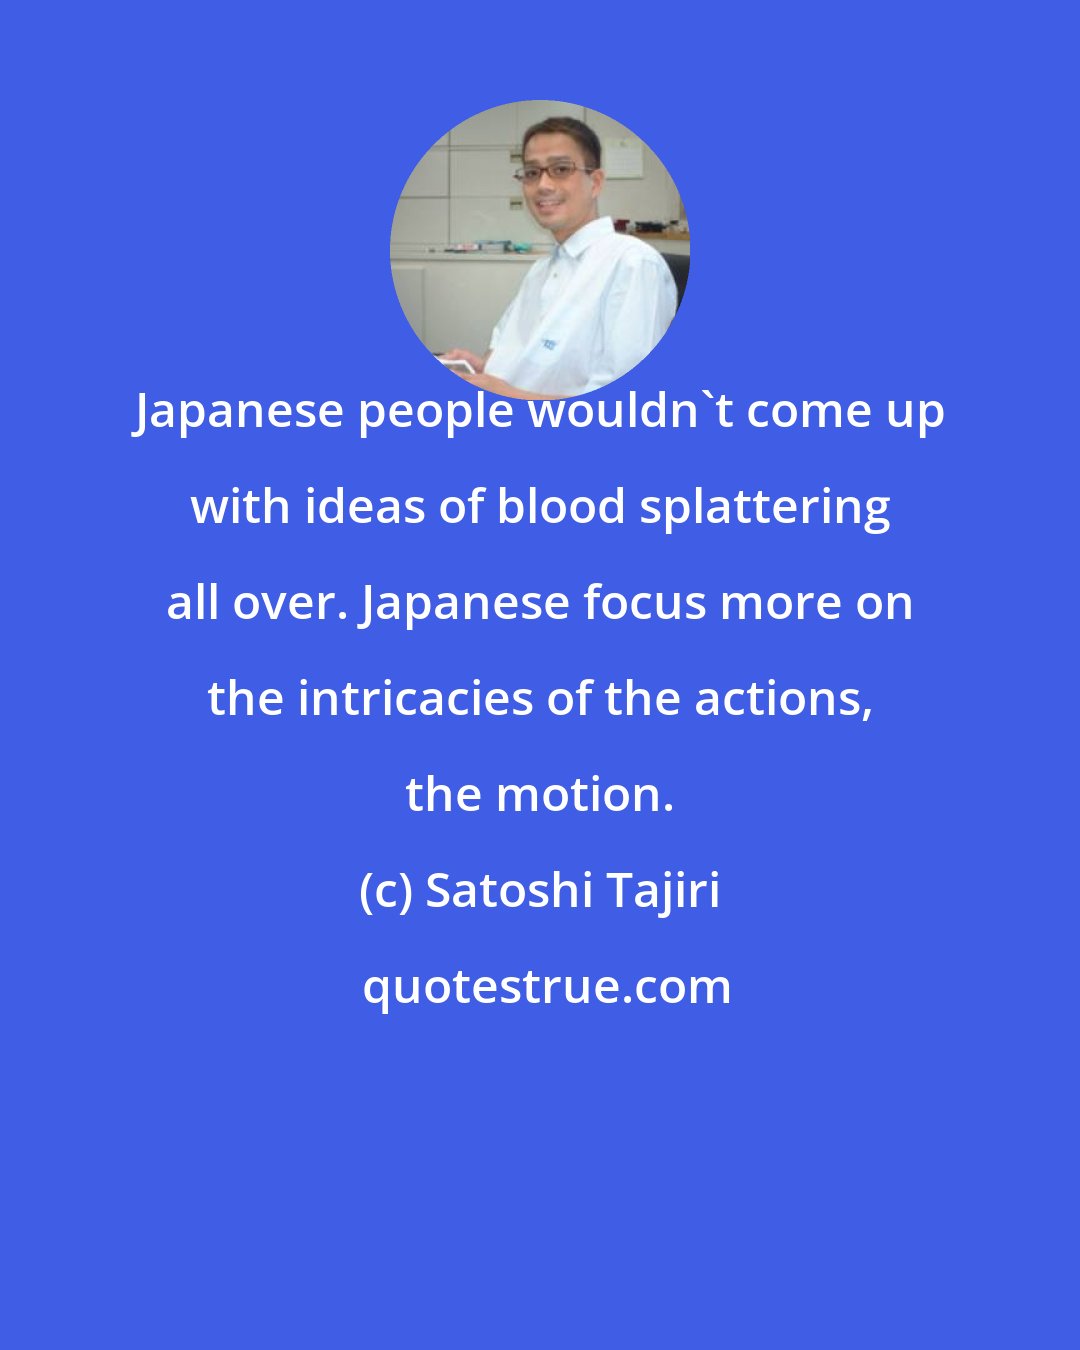 Satoshi Tajiri: Japanese people wouldn't come up with ideas of blood splattering all over. Japanese focus more on the intricacies of the actions, the motion.